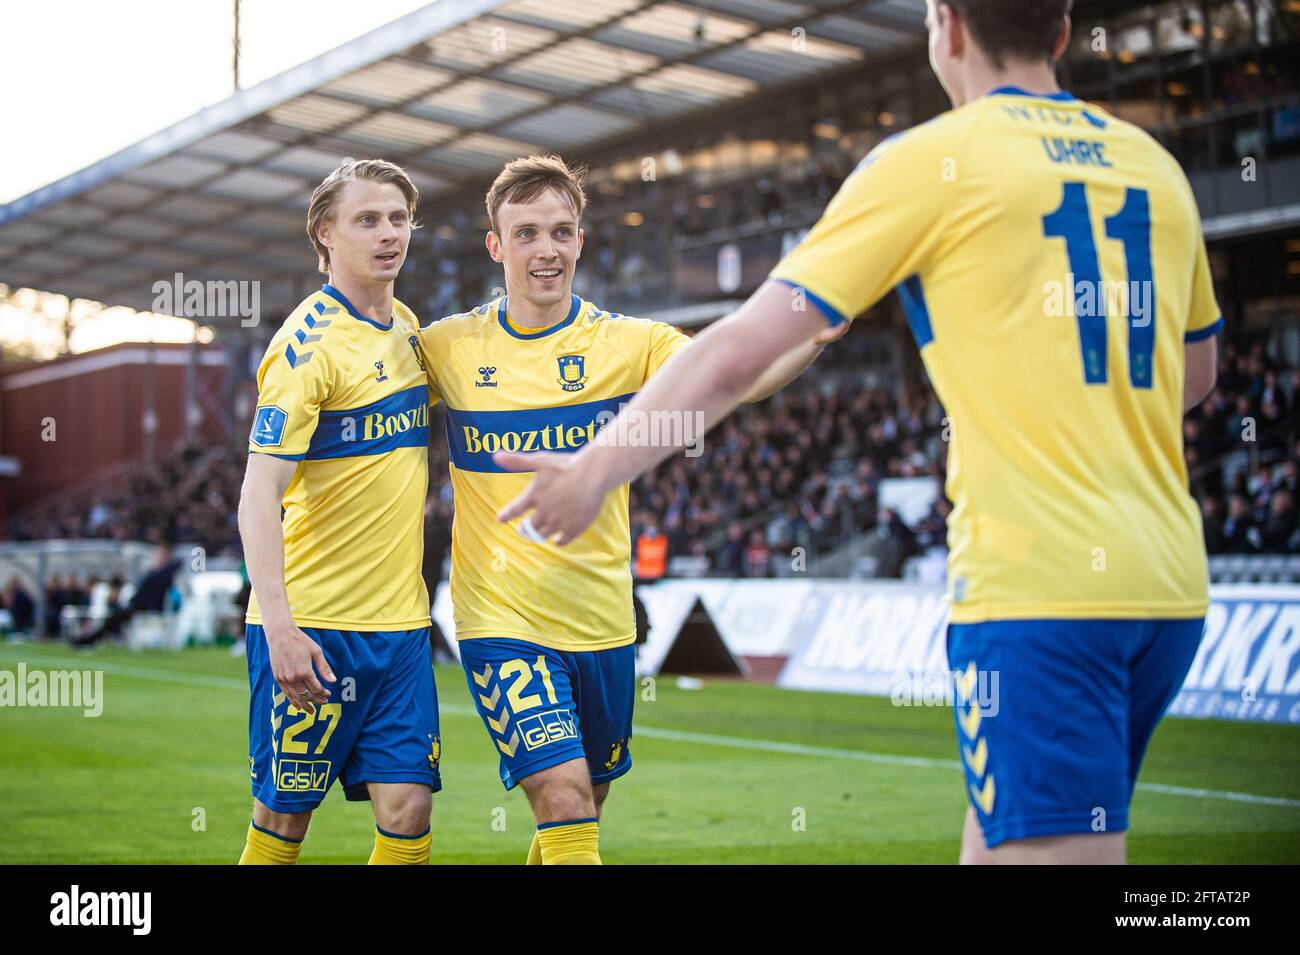 Aarhus, Denmark. 20th, May 2021. Mikael Uhre (11) of Broendby IF scores for 0-1 and celebrates with Simon Hedlund (27) and Lasse Vigen Christensen (21) during the 3F Superliga match between Aarhus GF and Broendby IF at Ceres Park in Aarhus. (Photo credit: Gonzales Photo - Morten Kjaer). Stock Photo